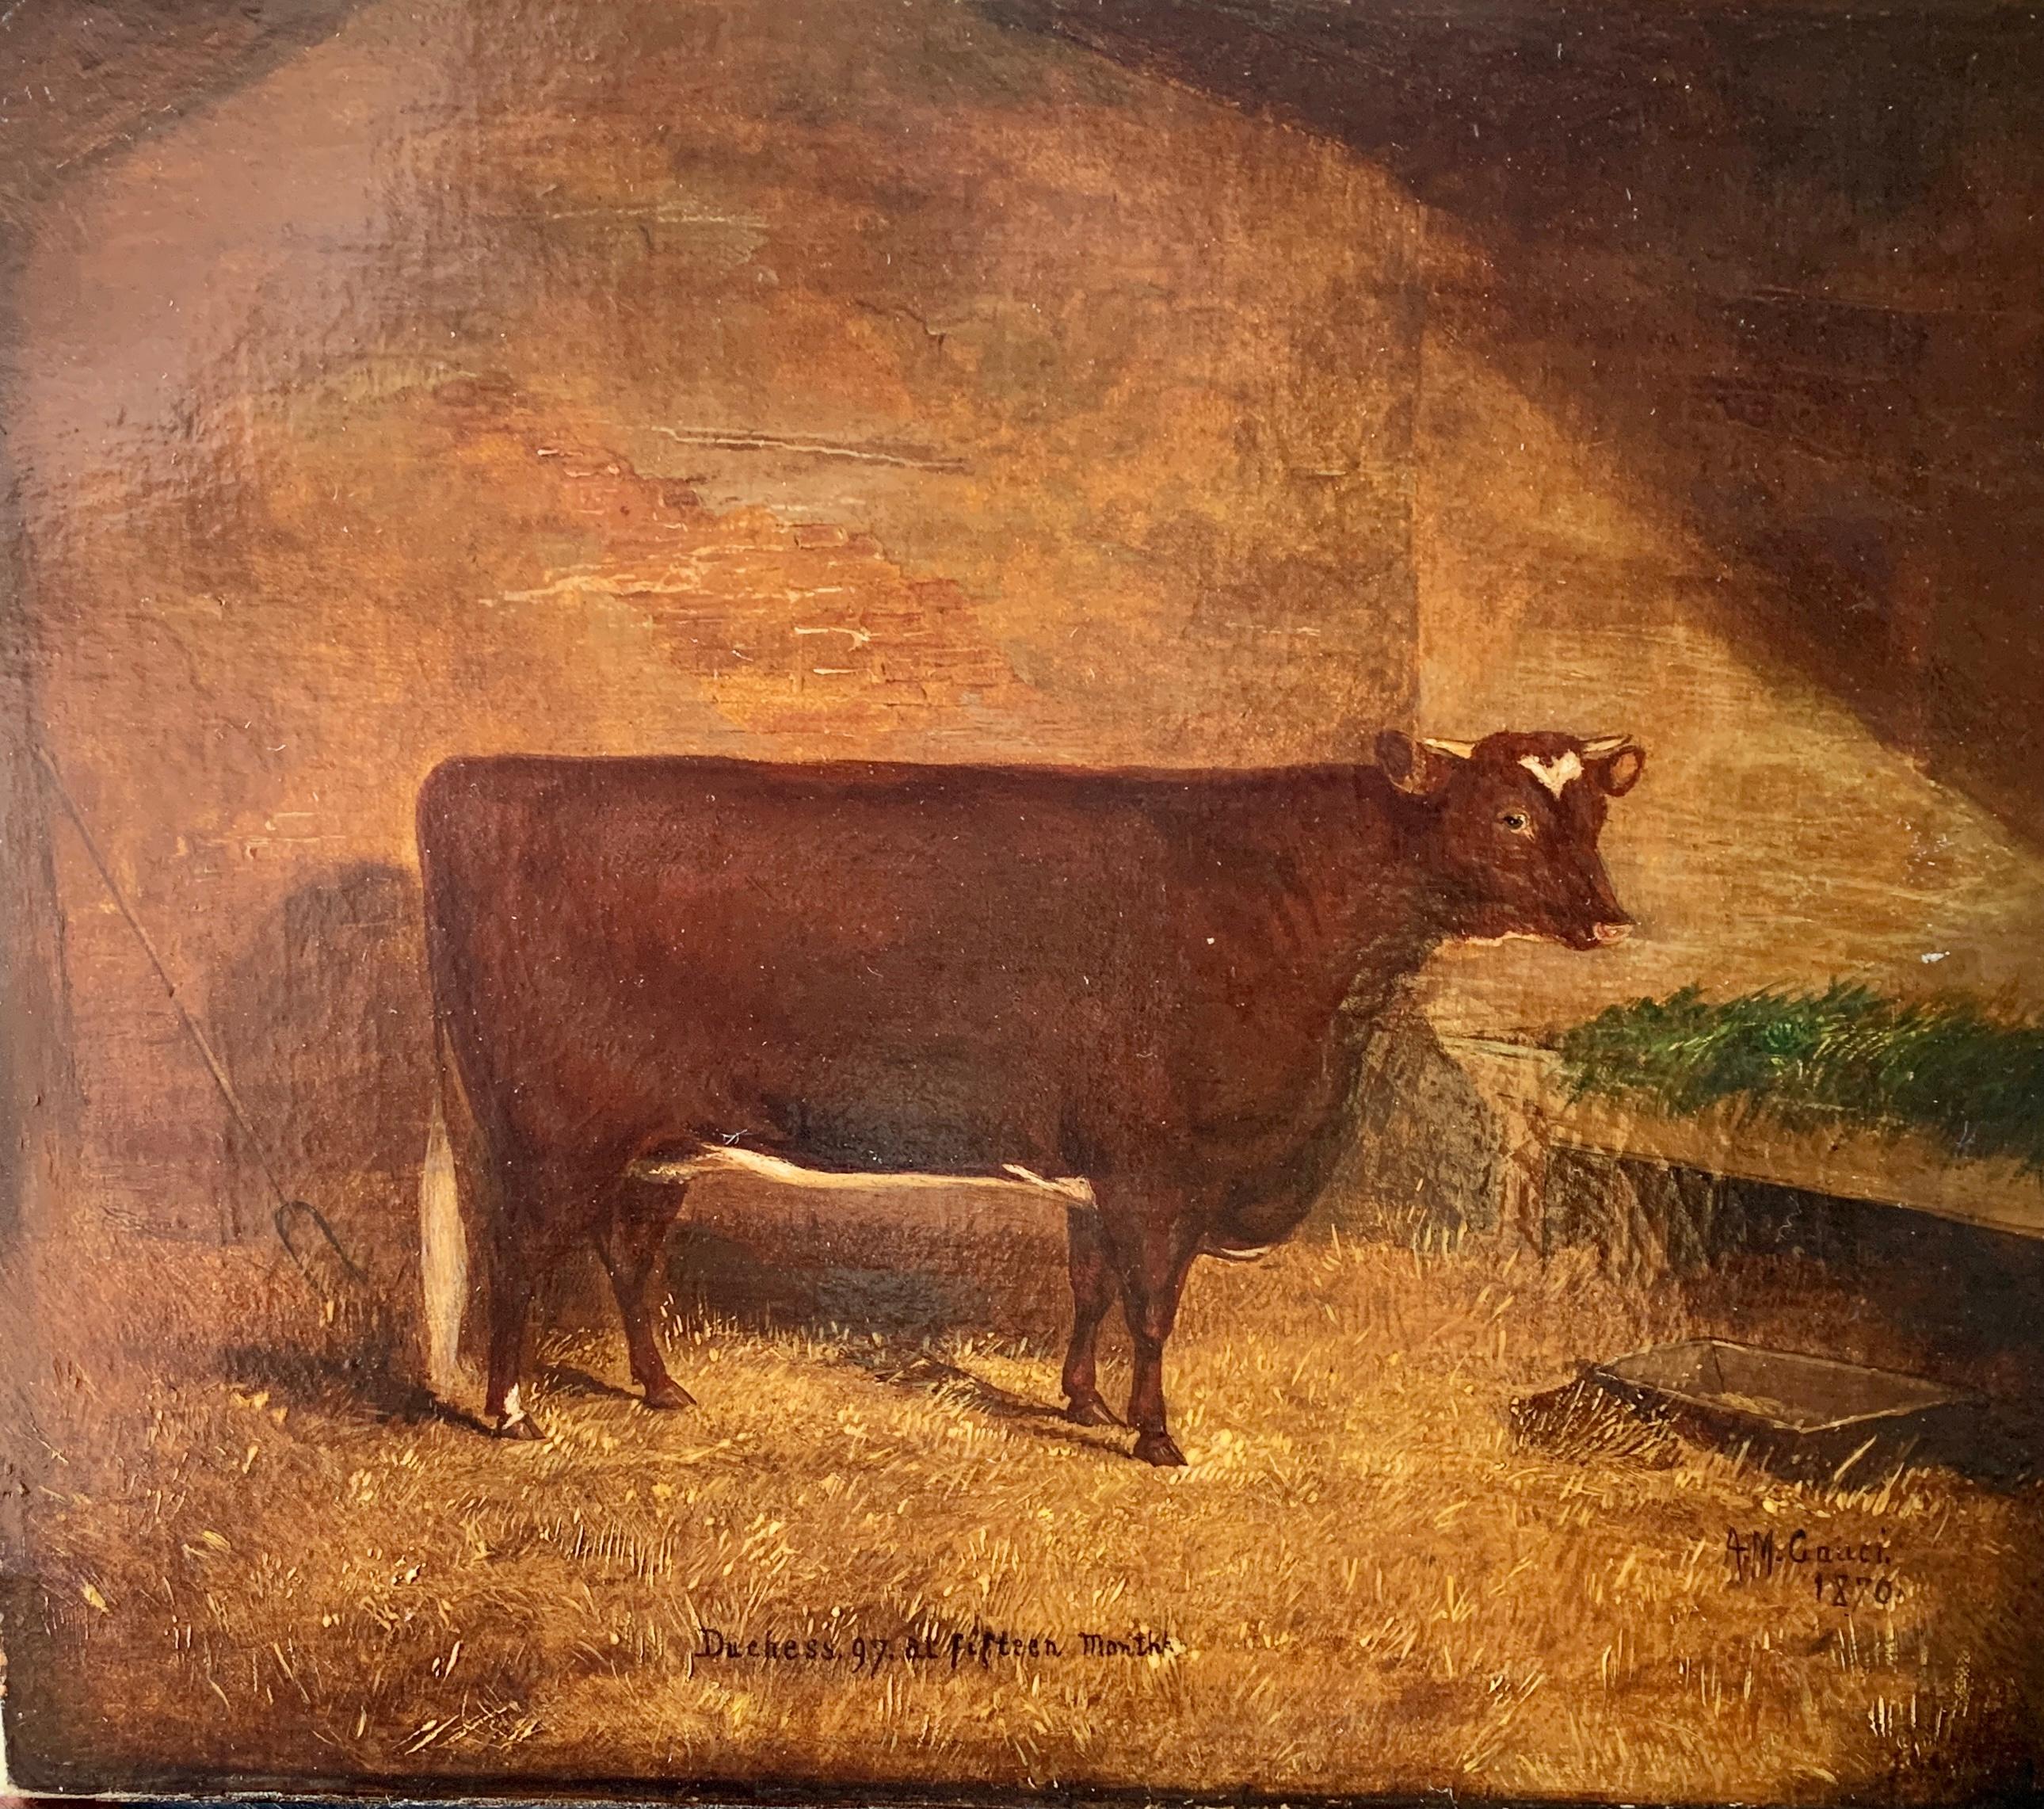 19th Century English Folk art portrait of a Prize winning Cow in a stable - Painting by A.M.Gauci